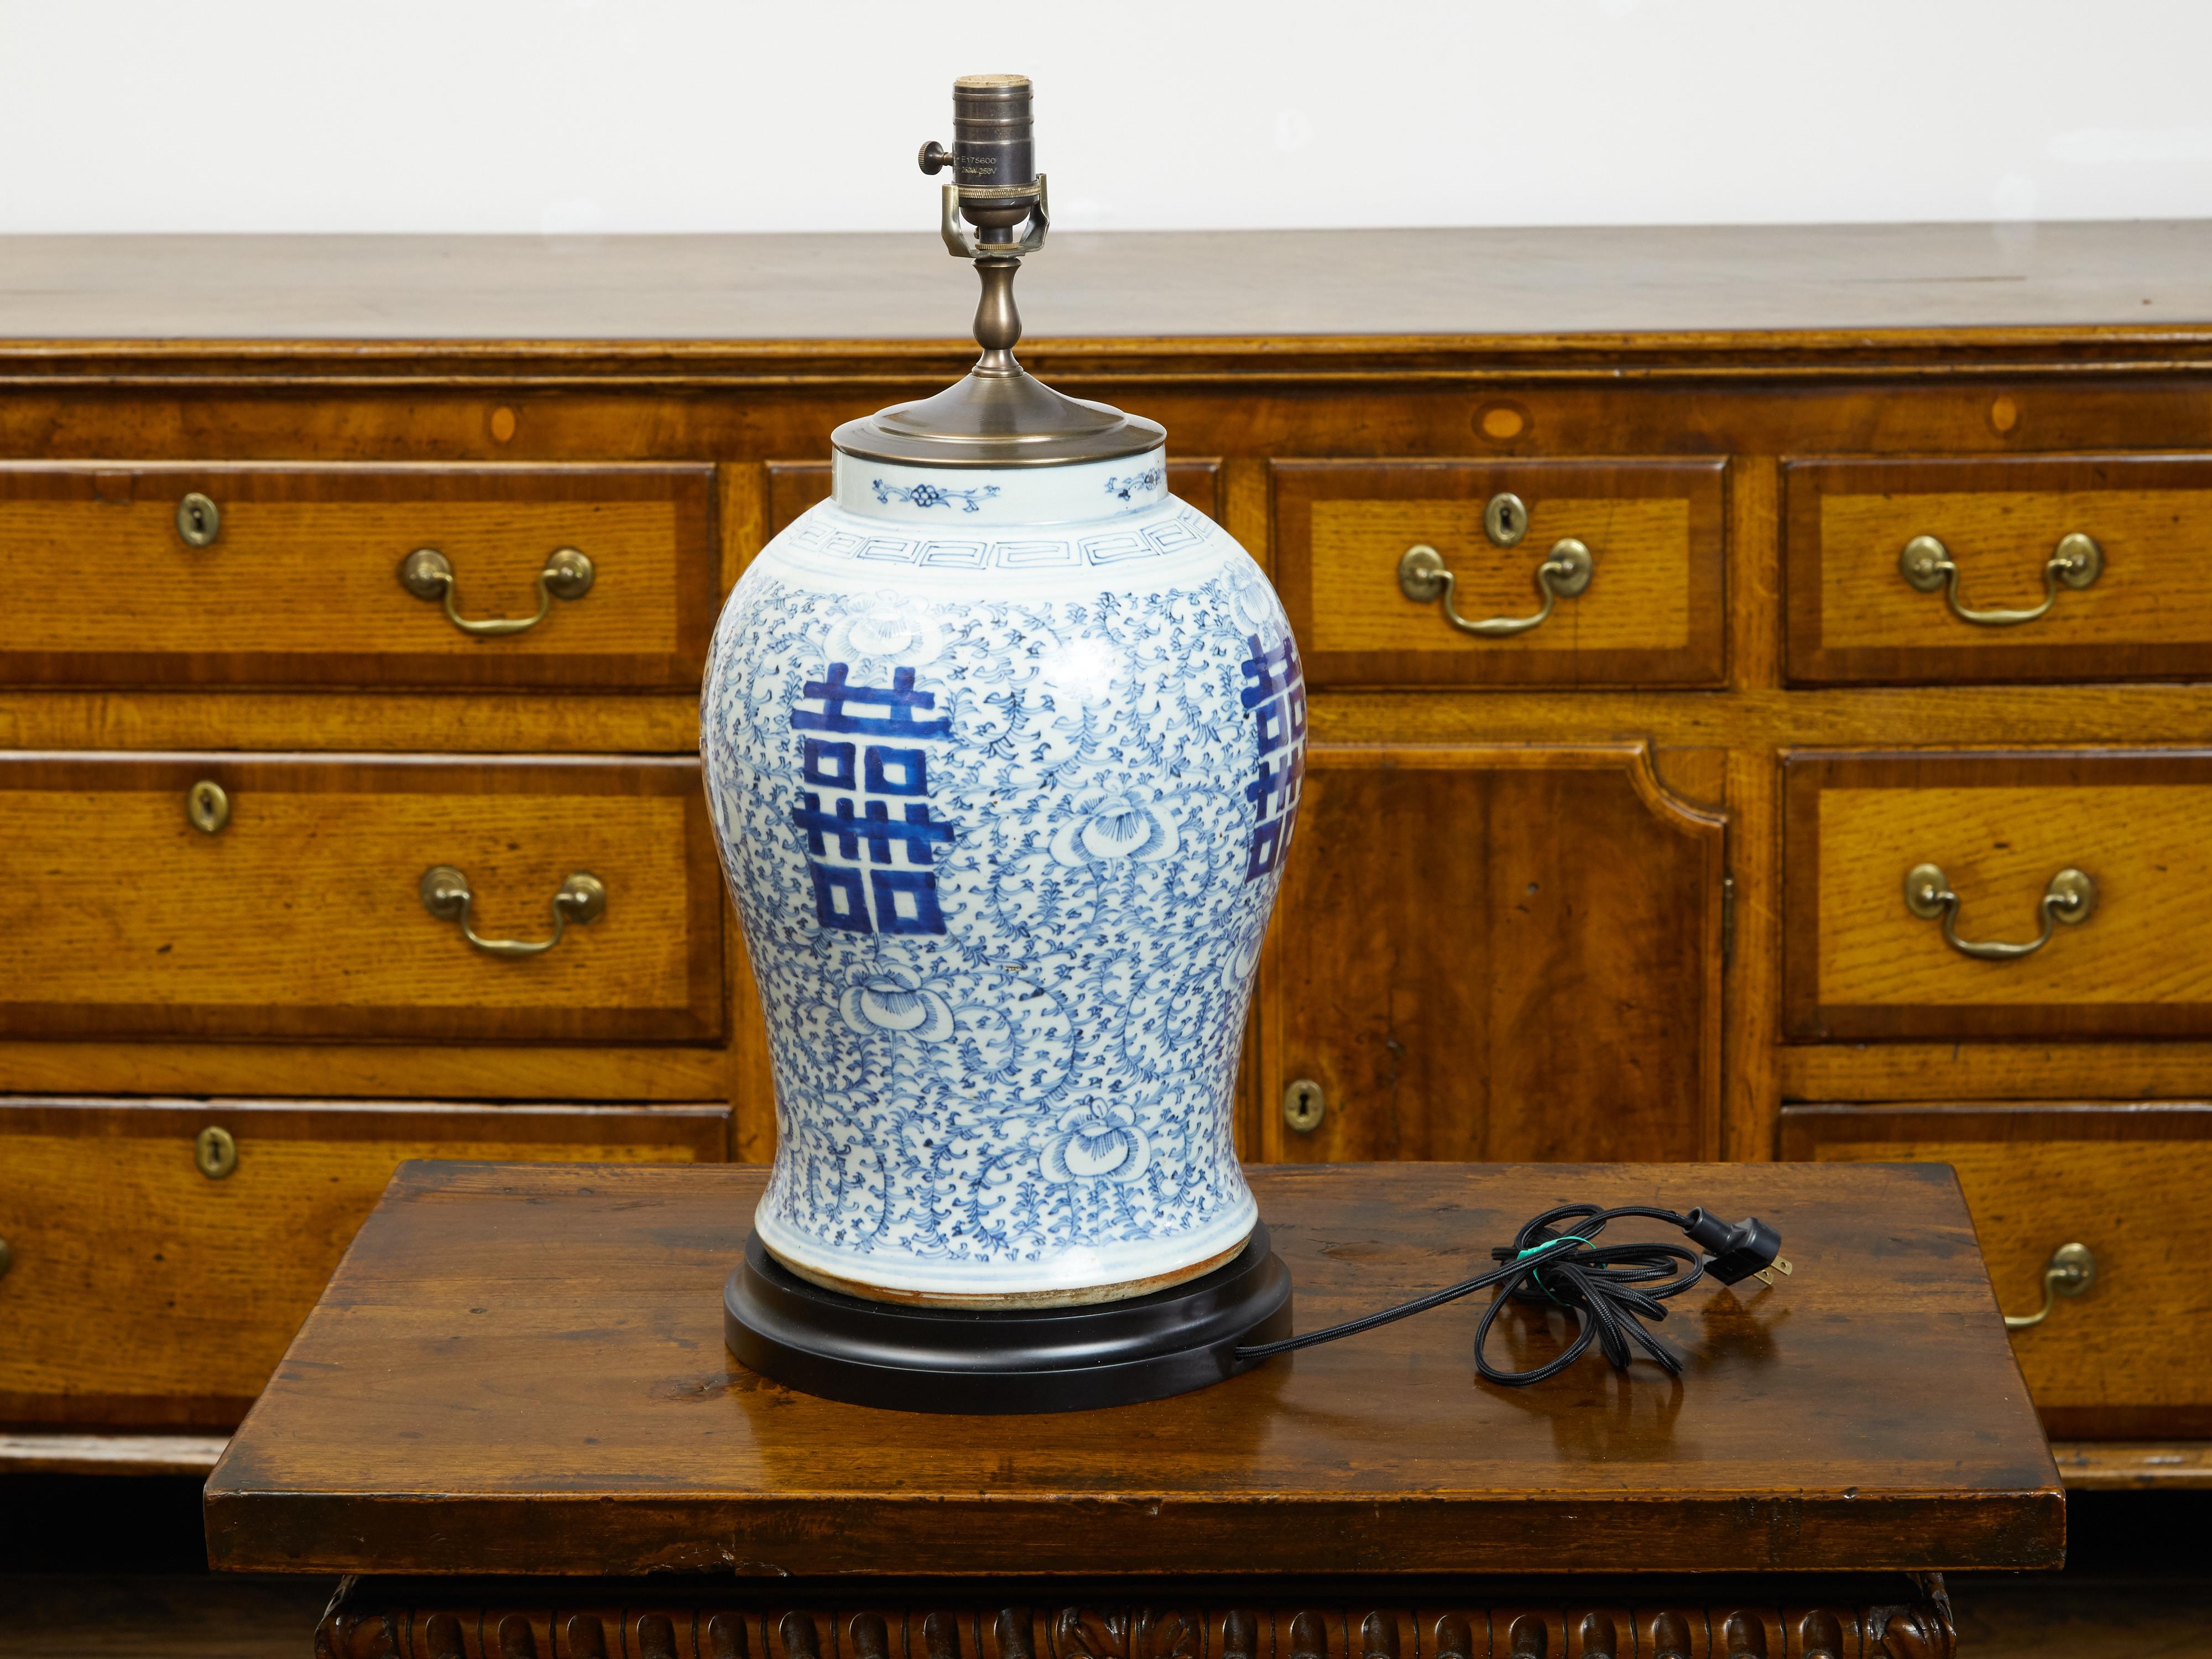 A Chinese blue and white Double Happiness temple jar from the early 20th century, mounted as a table lamp. Created in China during the first quarter of the 20th century, this temple jar features the Double Happiness motif standing out beautifully on